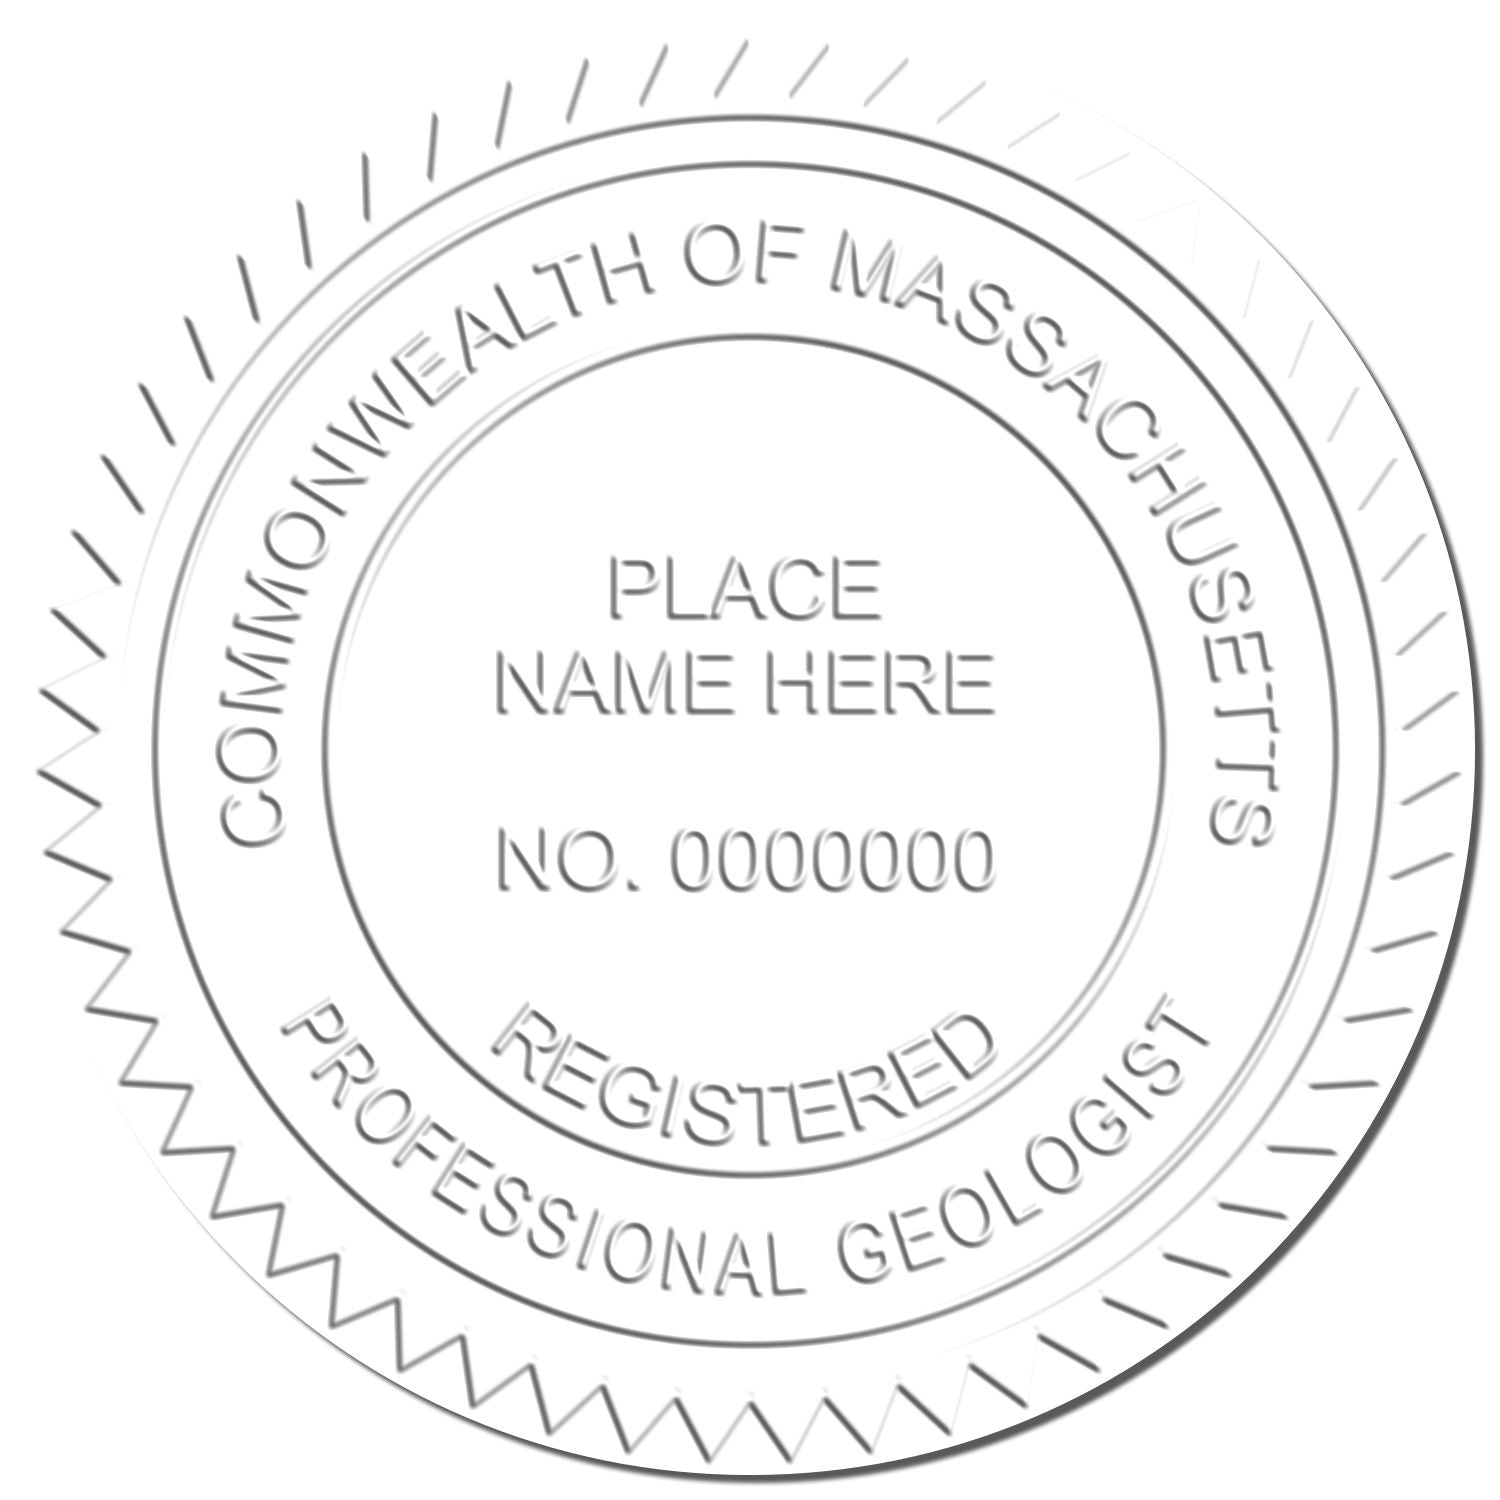 The Massachusetts Geologist Desk Seal stamp impression comes to life with a crisp, detailed image stamped on paper - showcasing true professional quality.